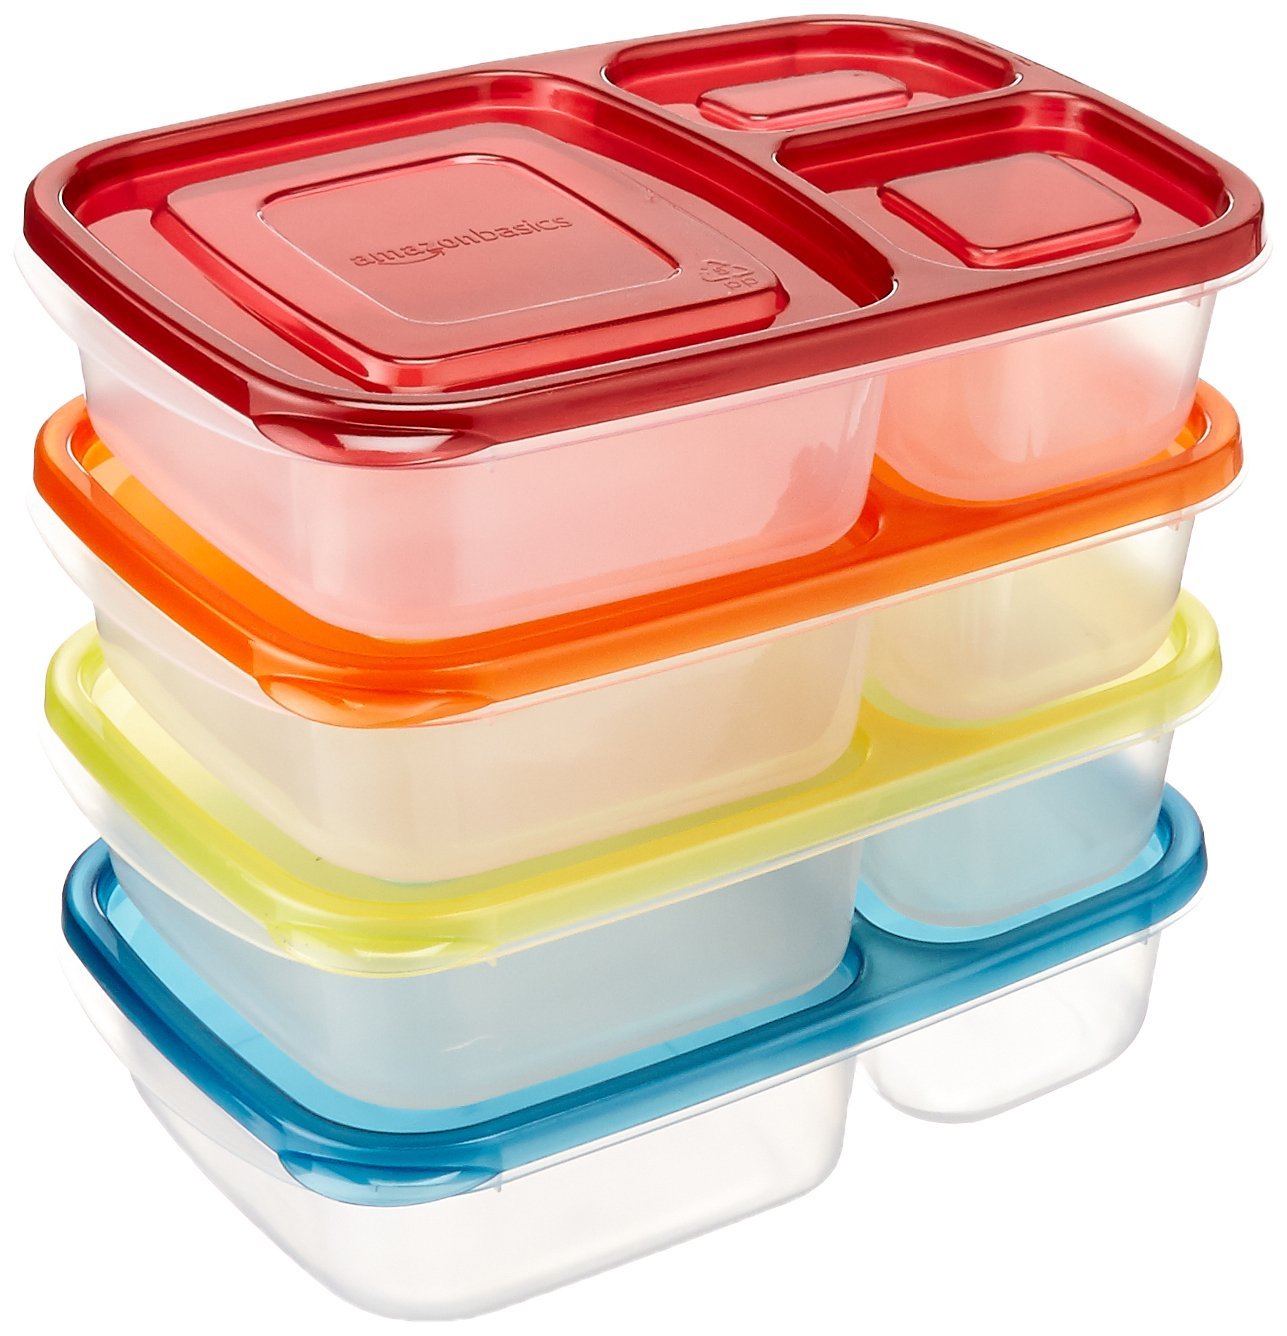 AmazonBasics Bento Lunch Box Containers – Set of 4 – Just $9.99!